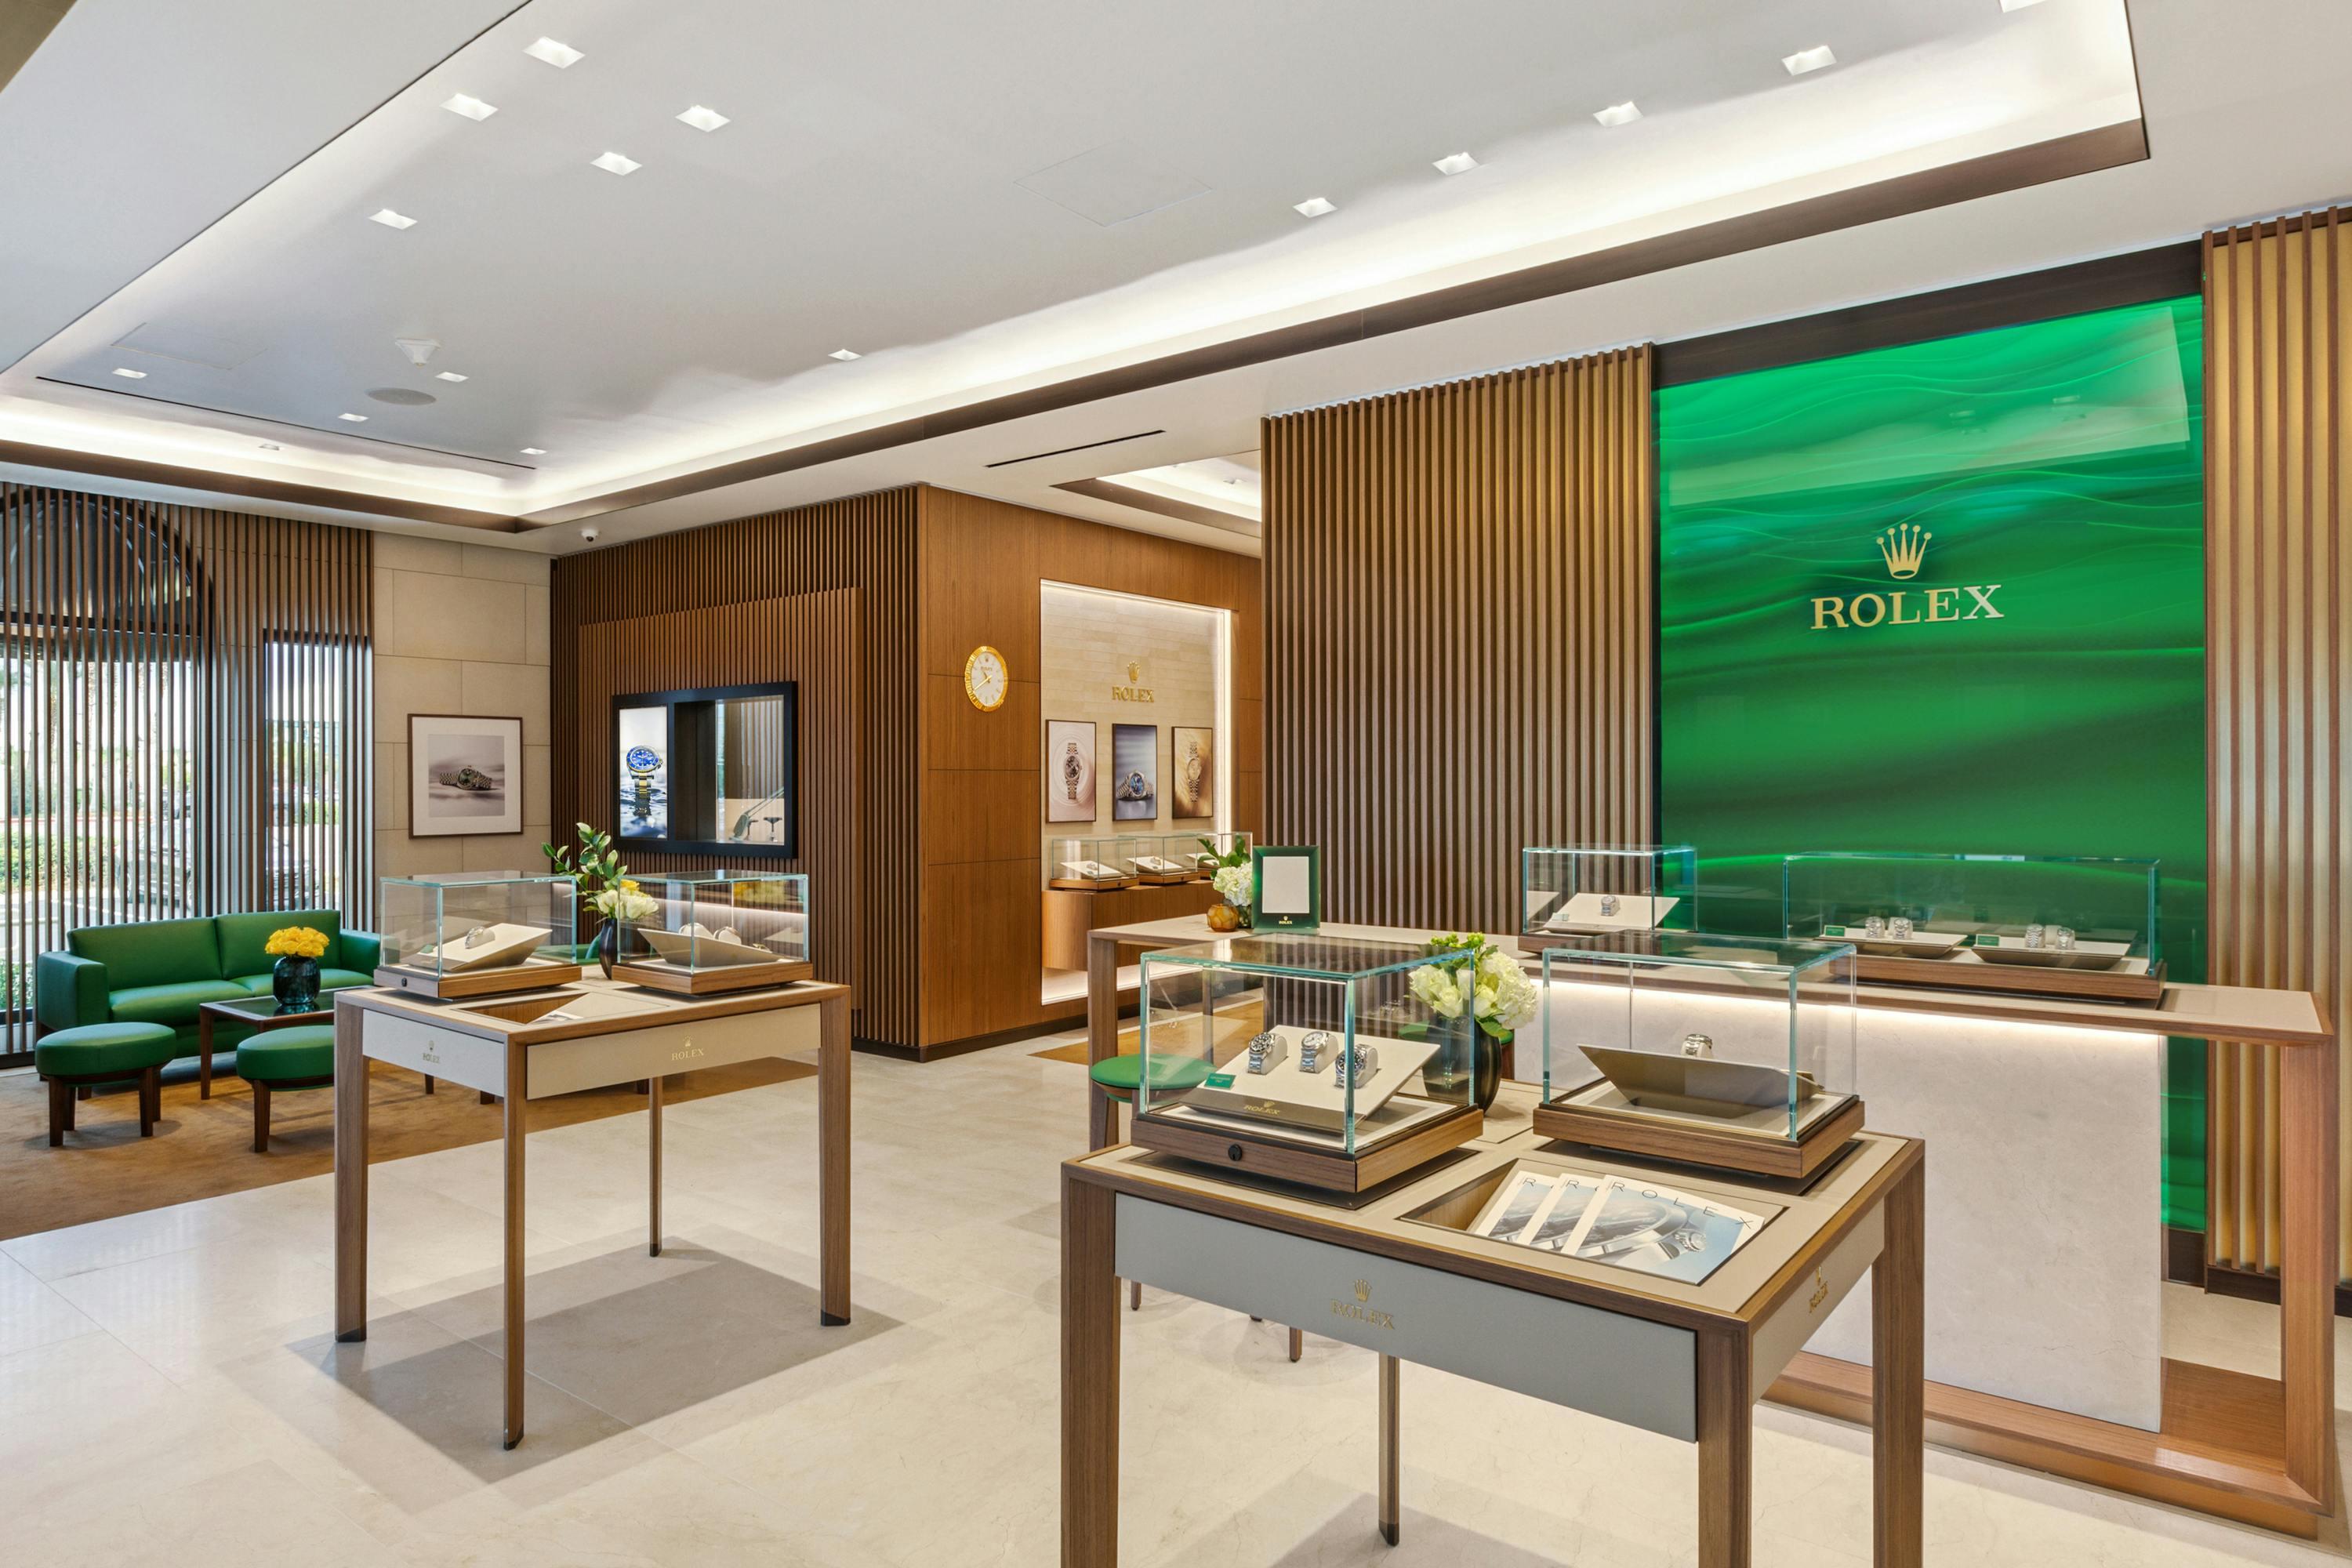 Interior of Rolex area at Lee Michaels Fine Jewelry in Metairie, LA